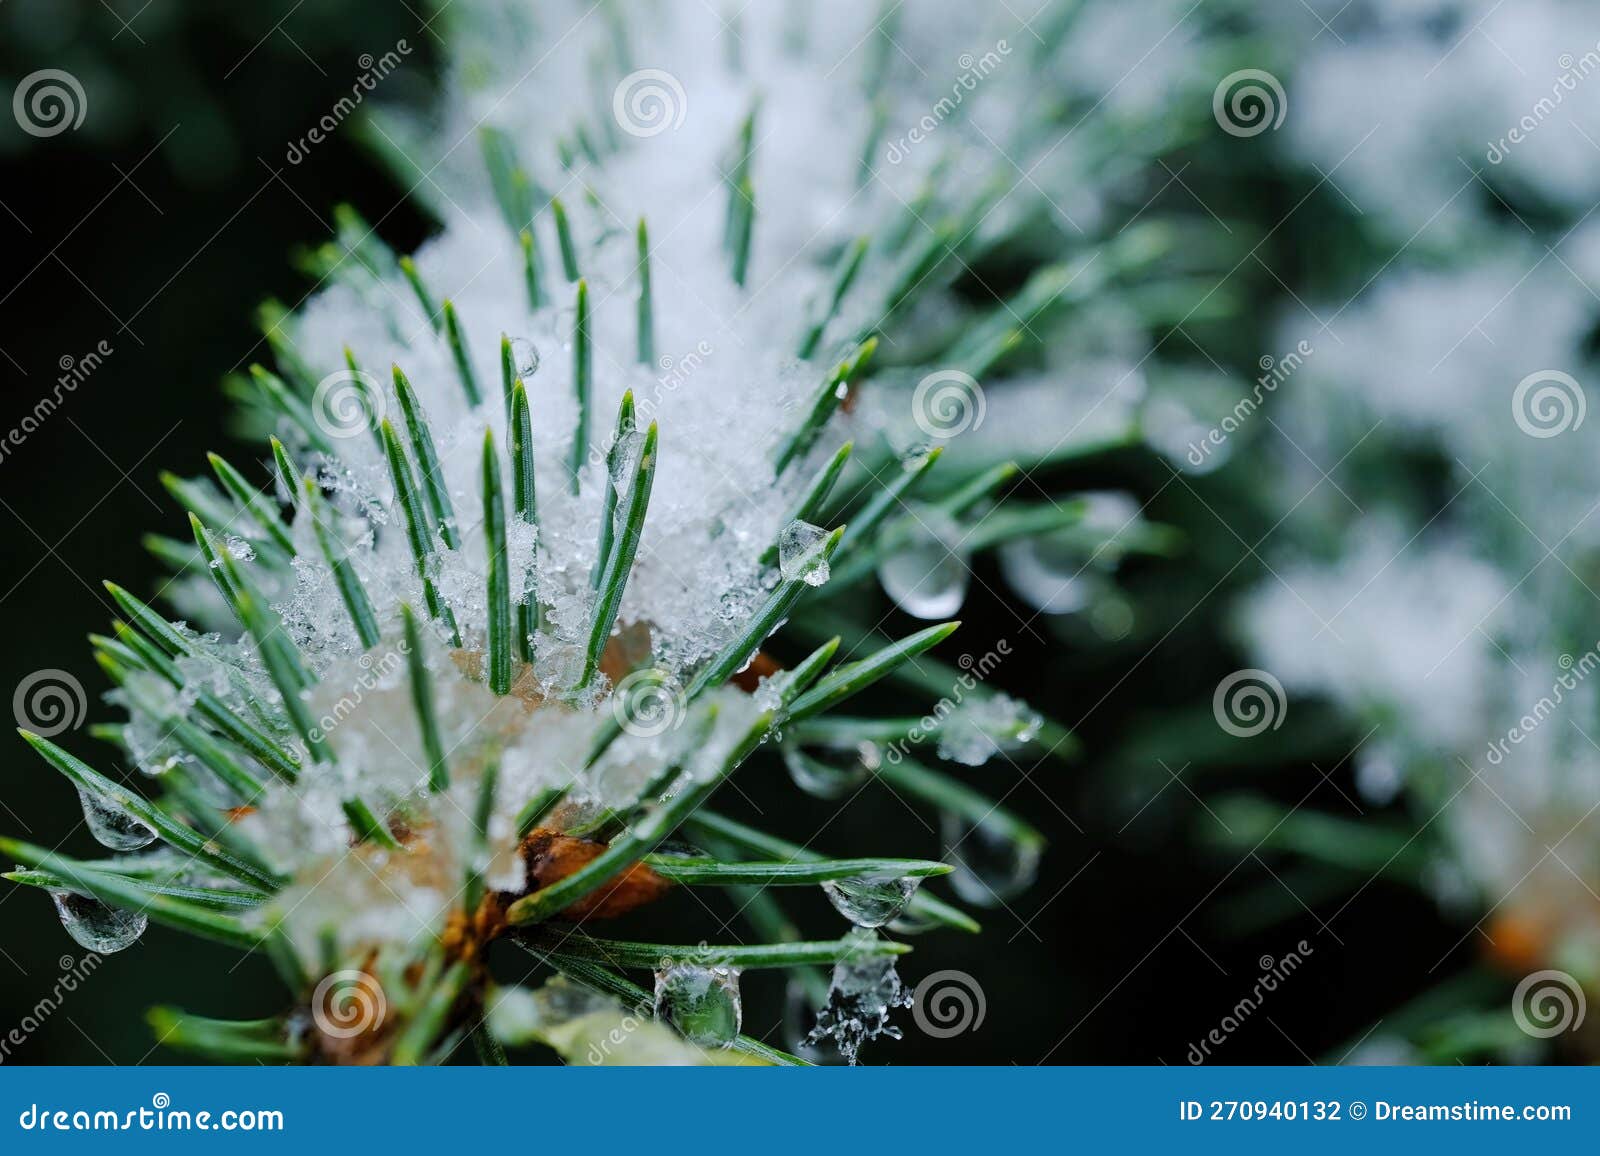 close-up shot of abies firma leaves with snow on them